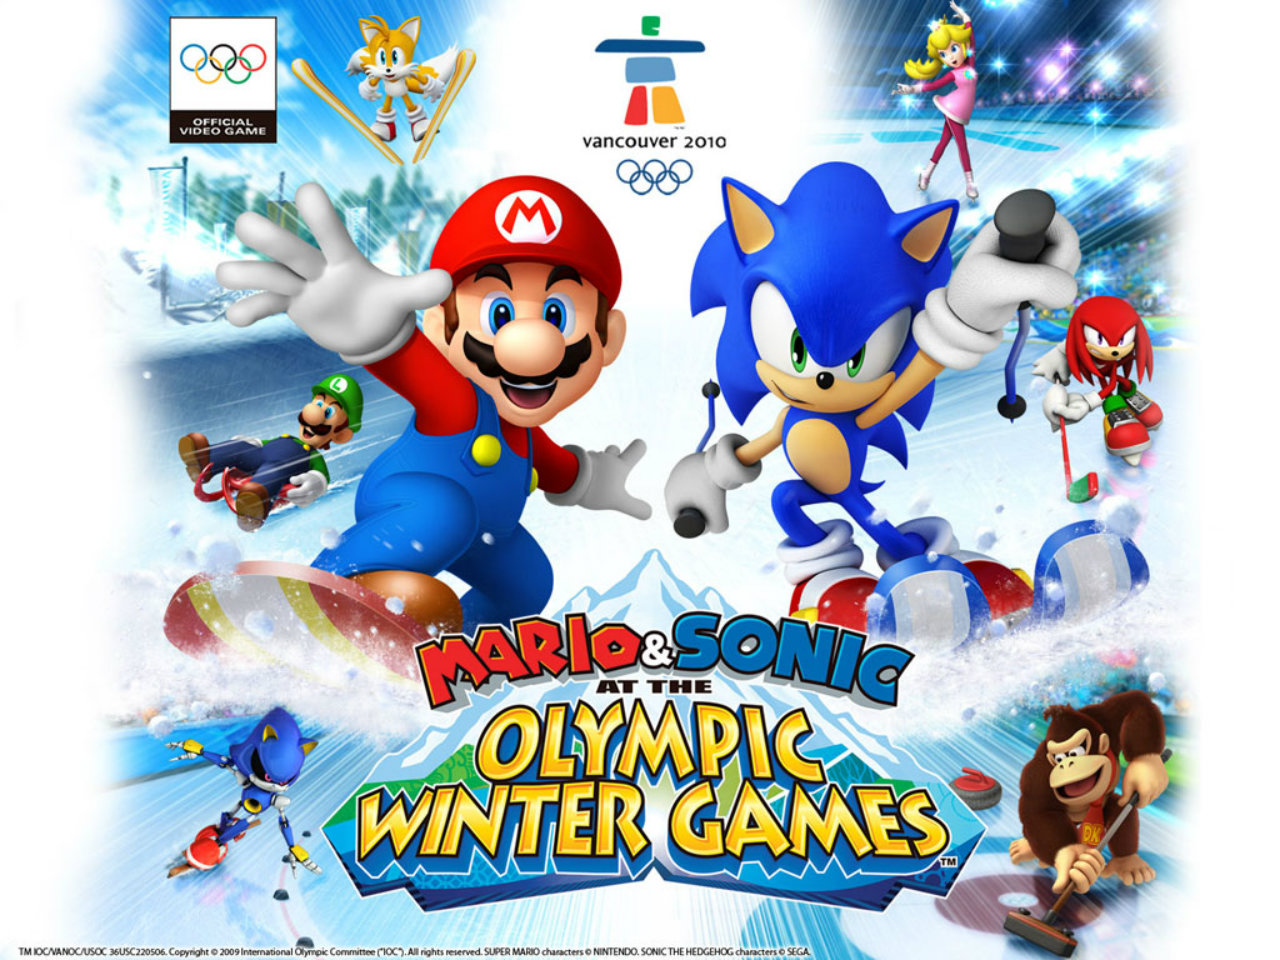 video game, mario & sonic at the olympic winter games